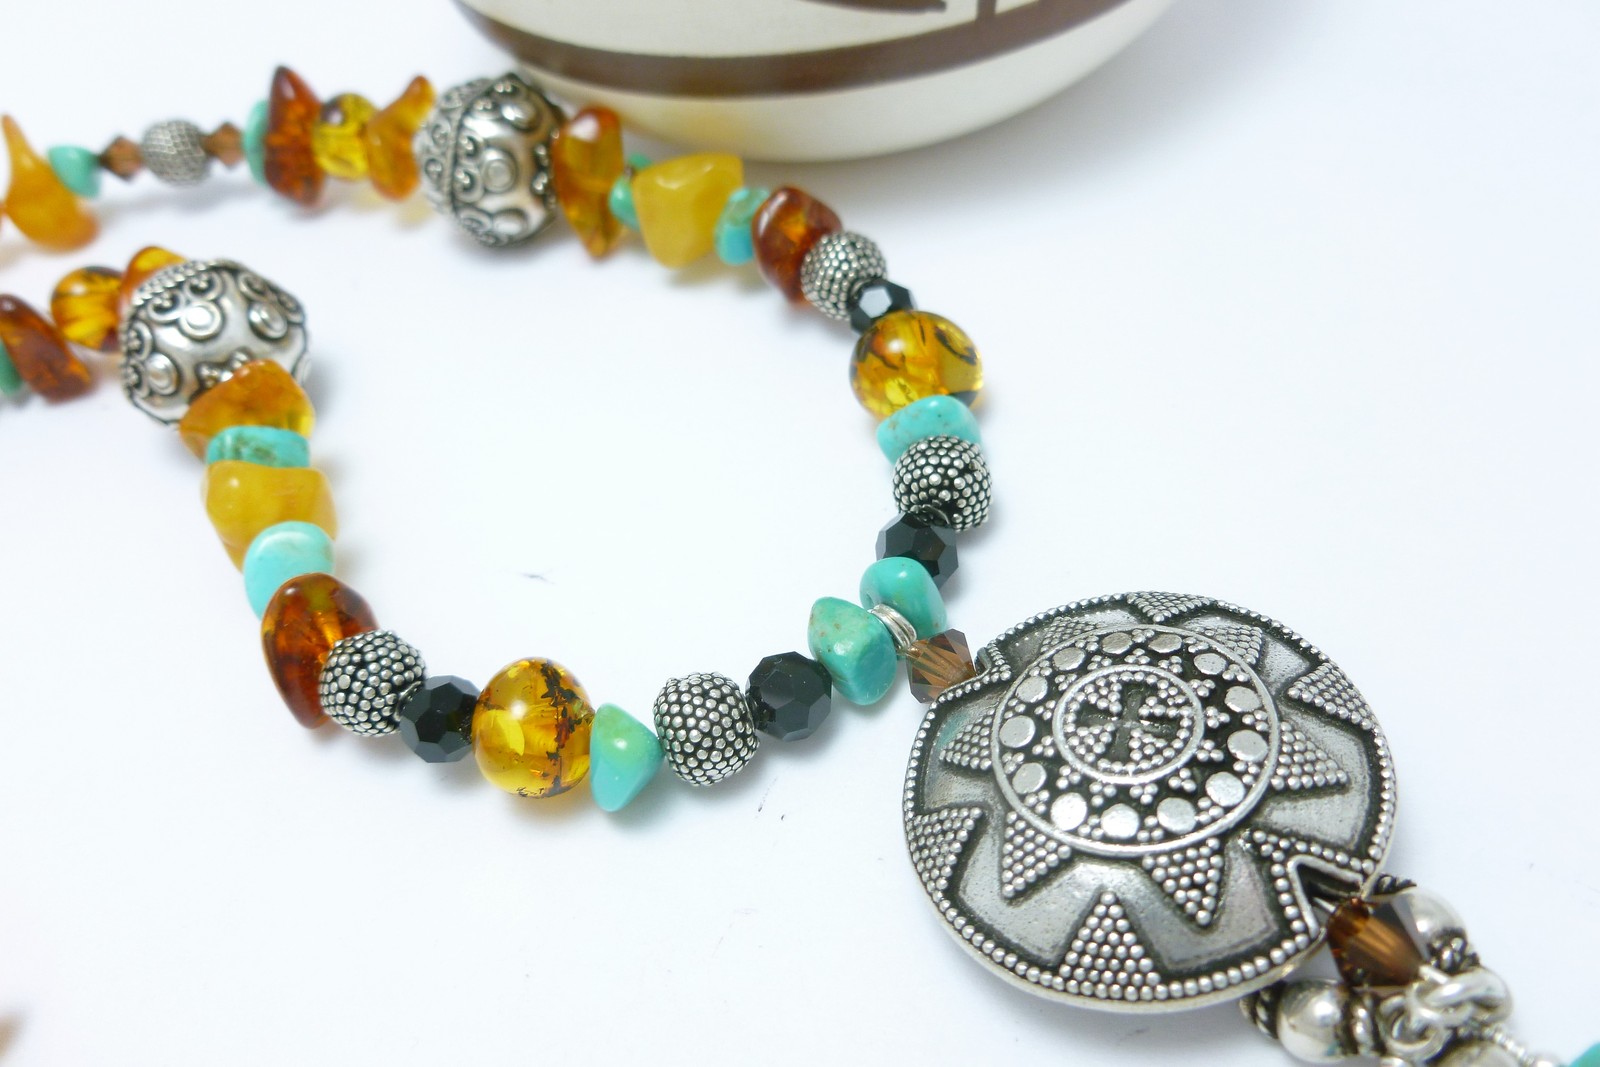 Turquoise and Amber Nugget Gemstones Bali Sterling Beaded Necklace - $85.00